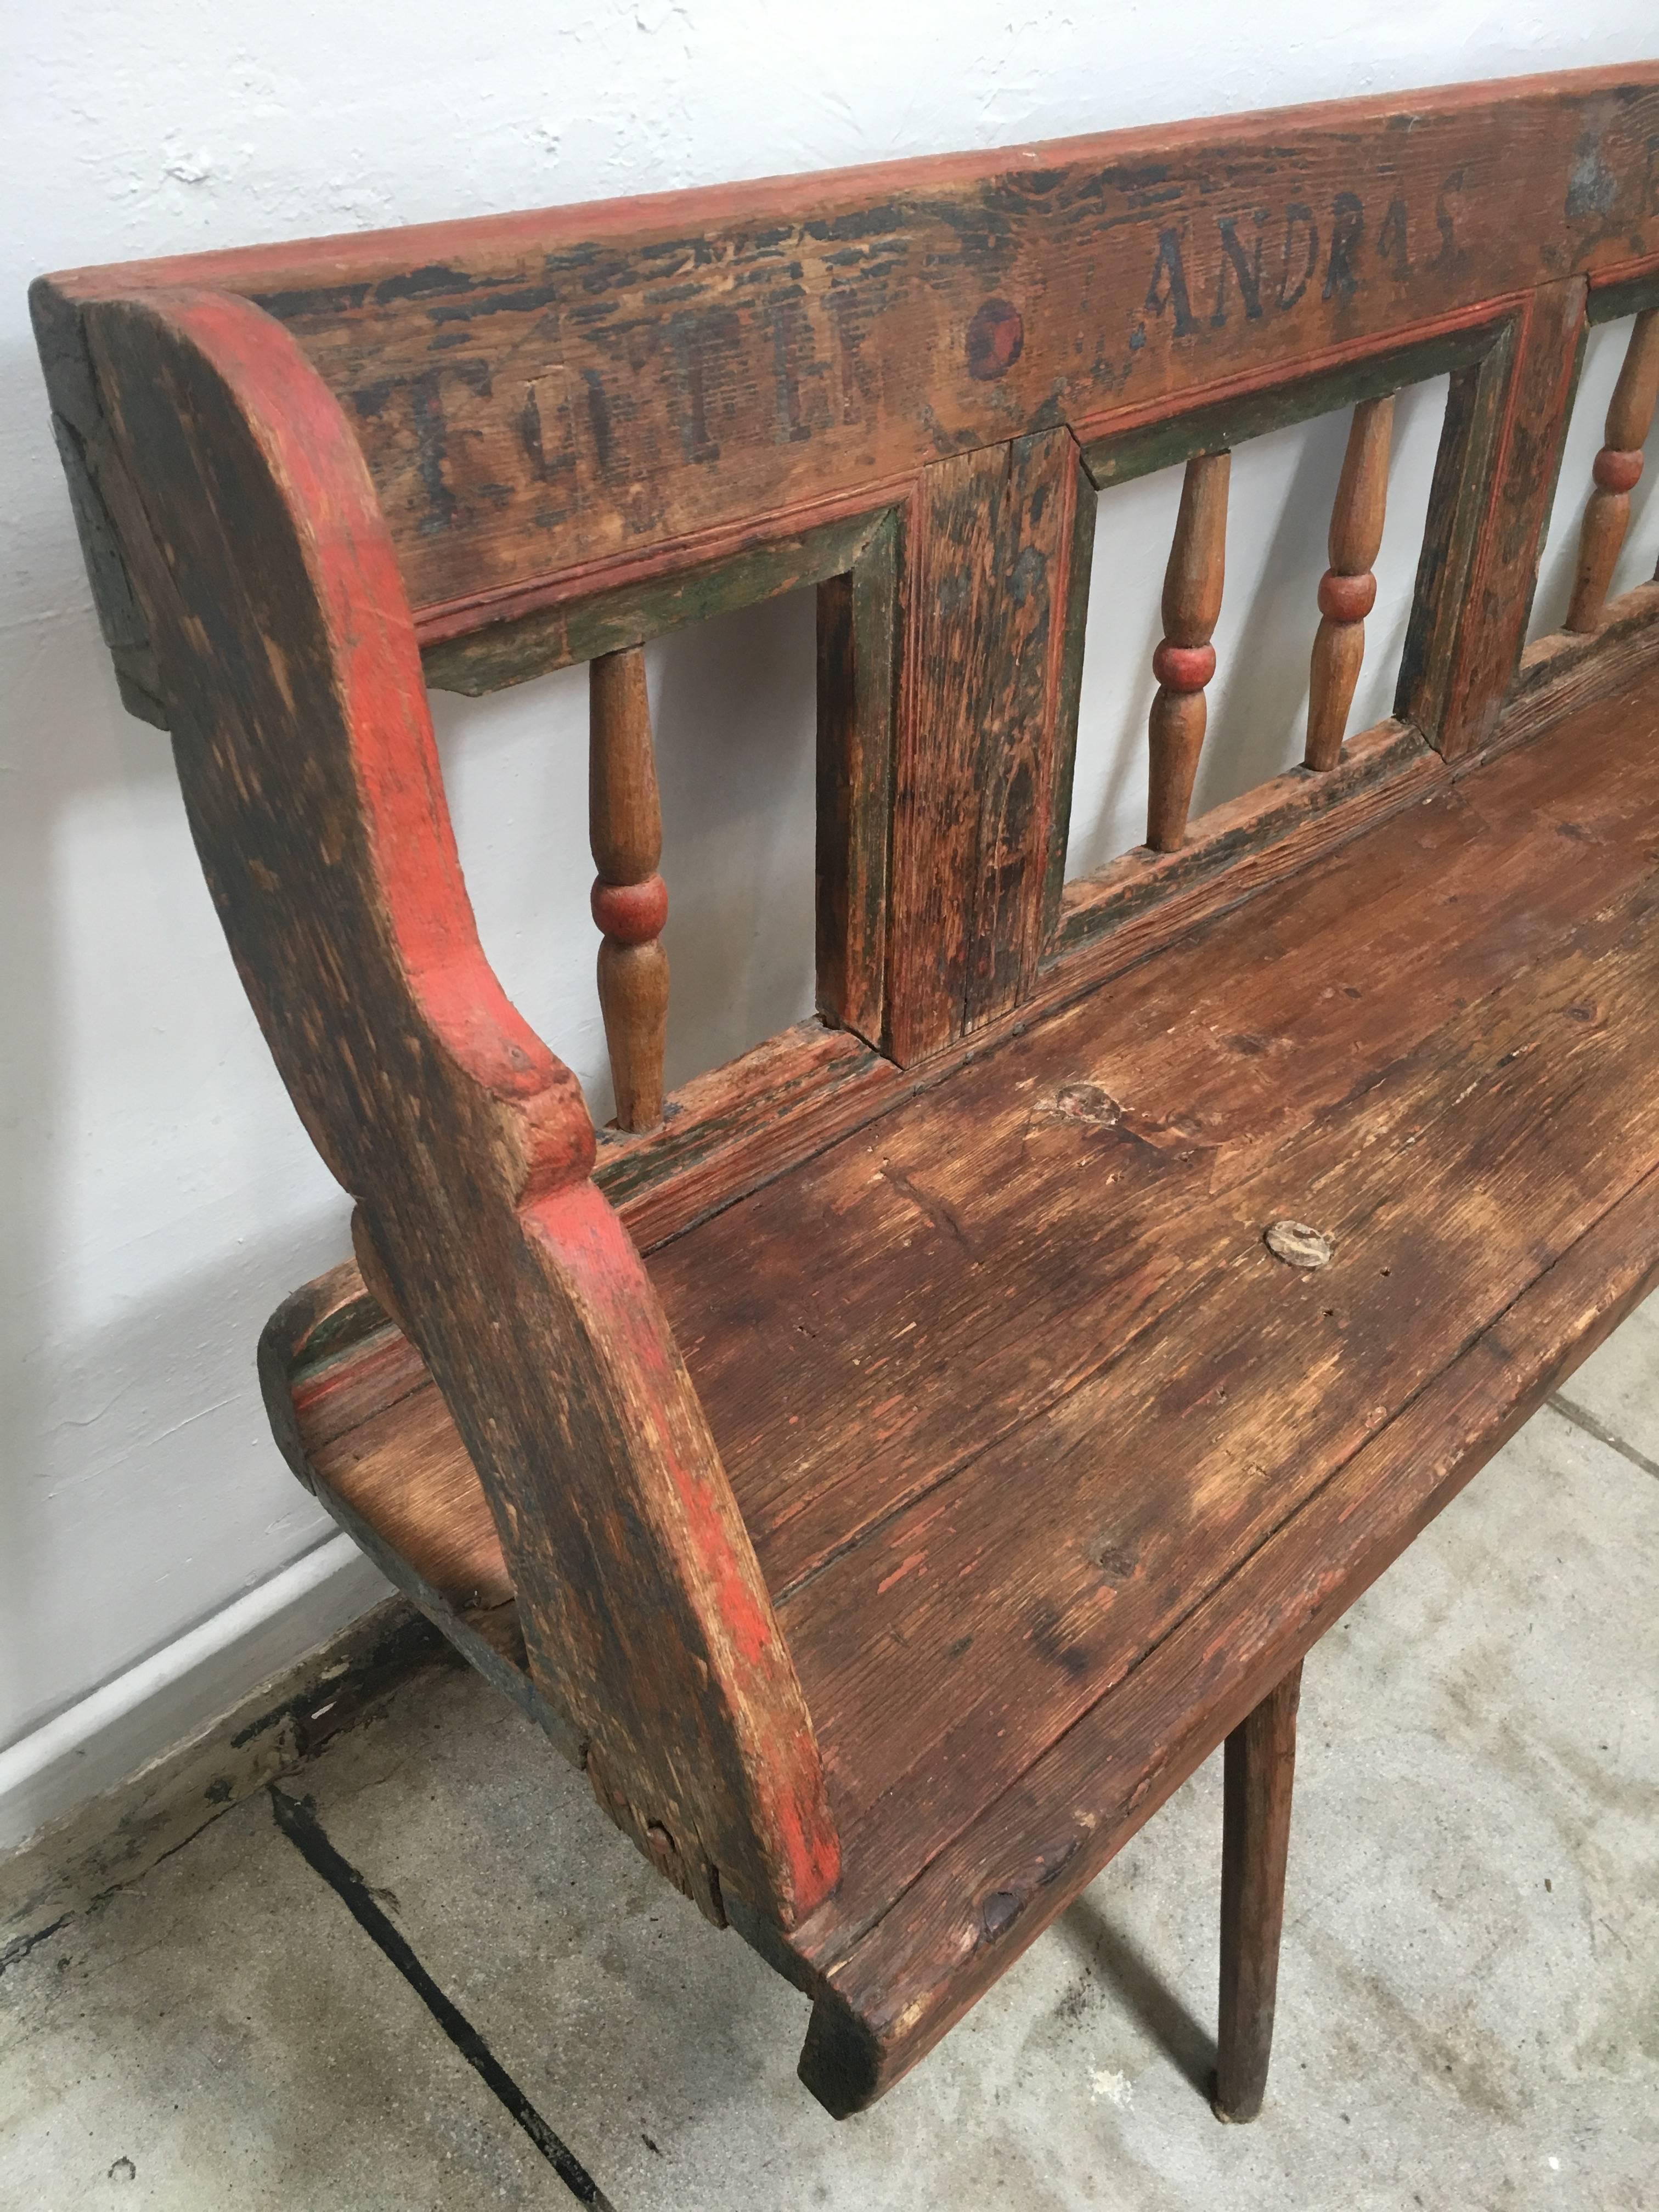 Ornate vintage bench circa 1868. Beautifully weathered paint colors of orange or red and green, and an inscription across the top of the back rest that includes the year.